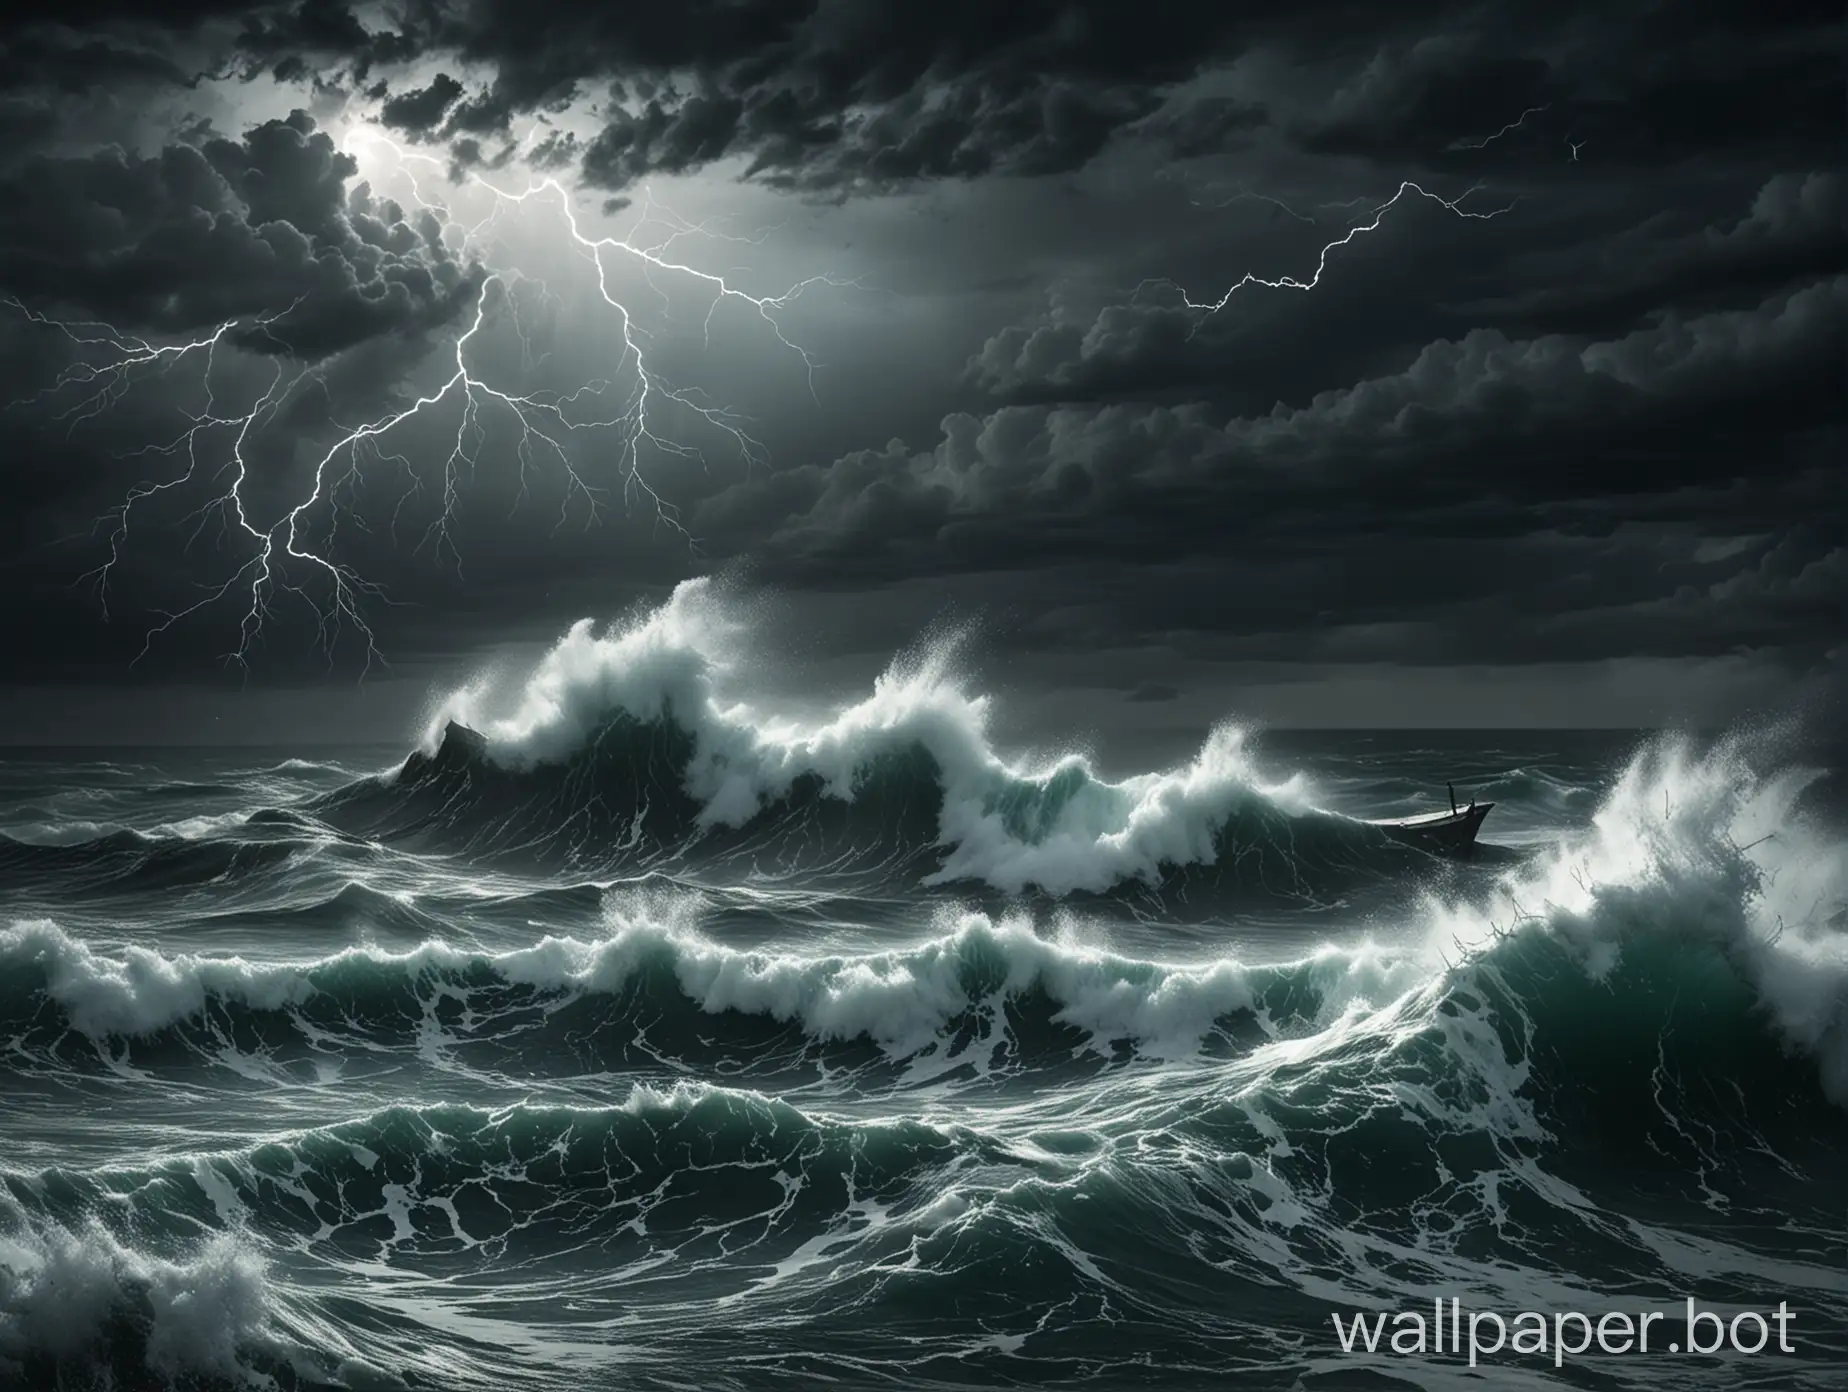 Dramatic-Storm-Over-Ocean-Captivating-Wallpaper-of-Lightning-and-Churning-Waves